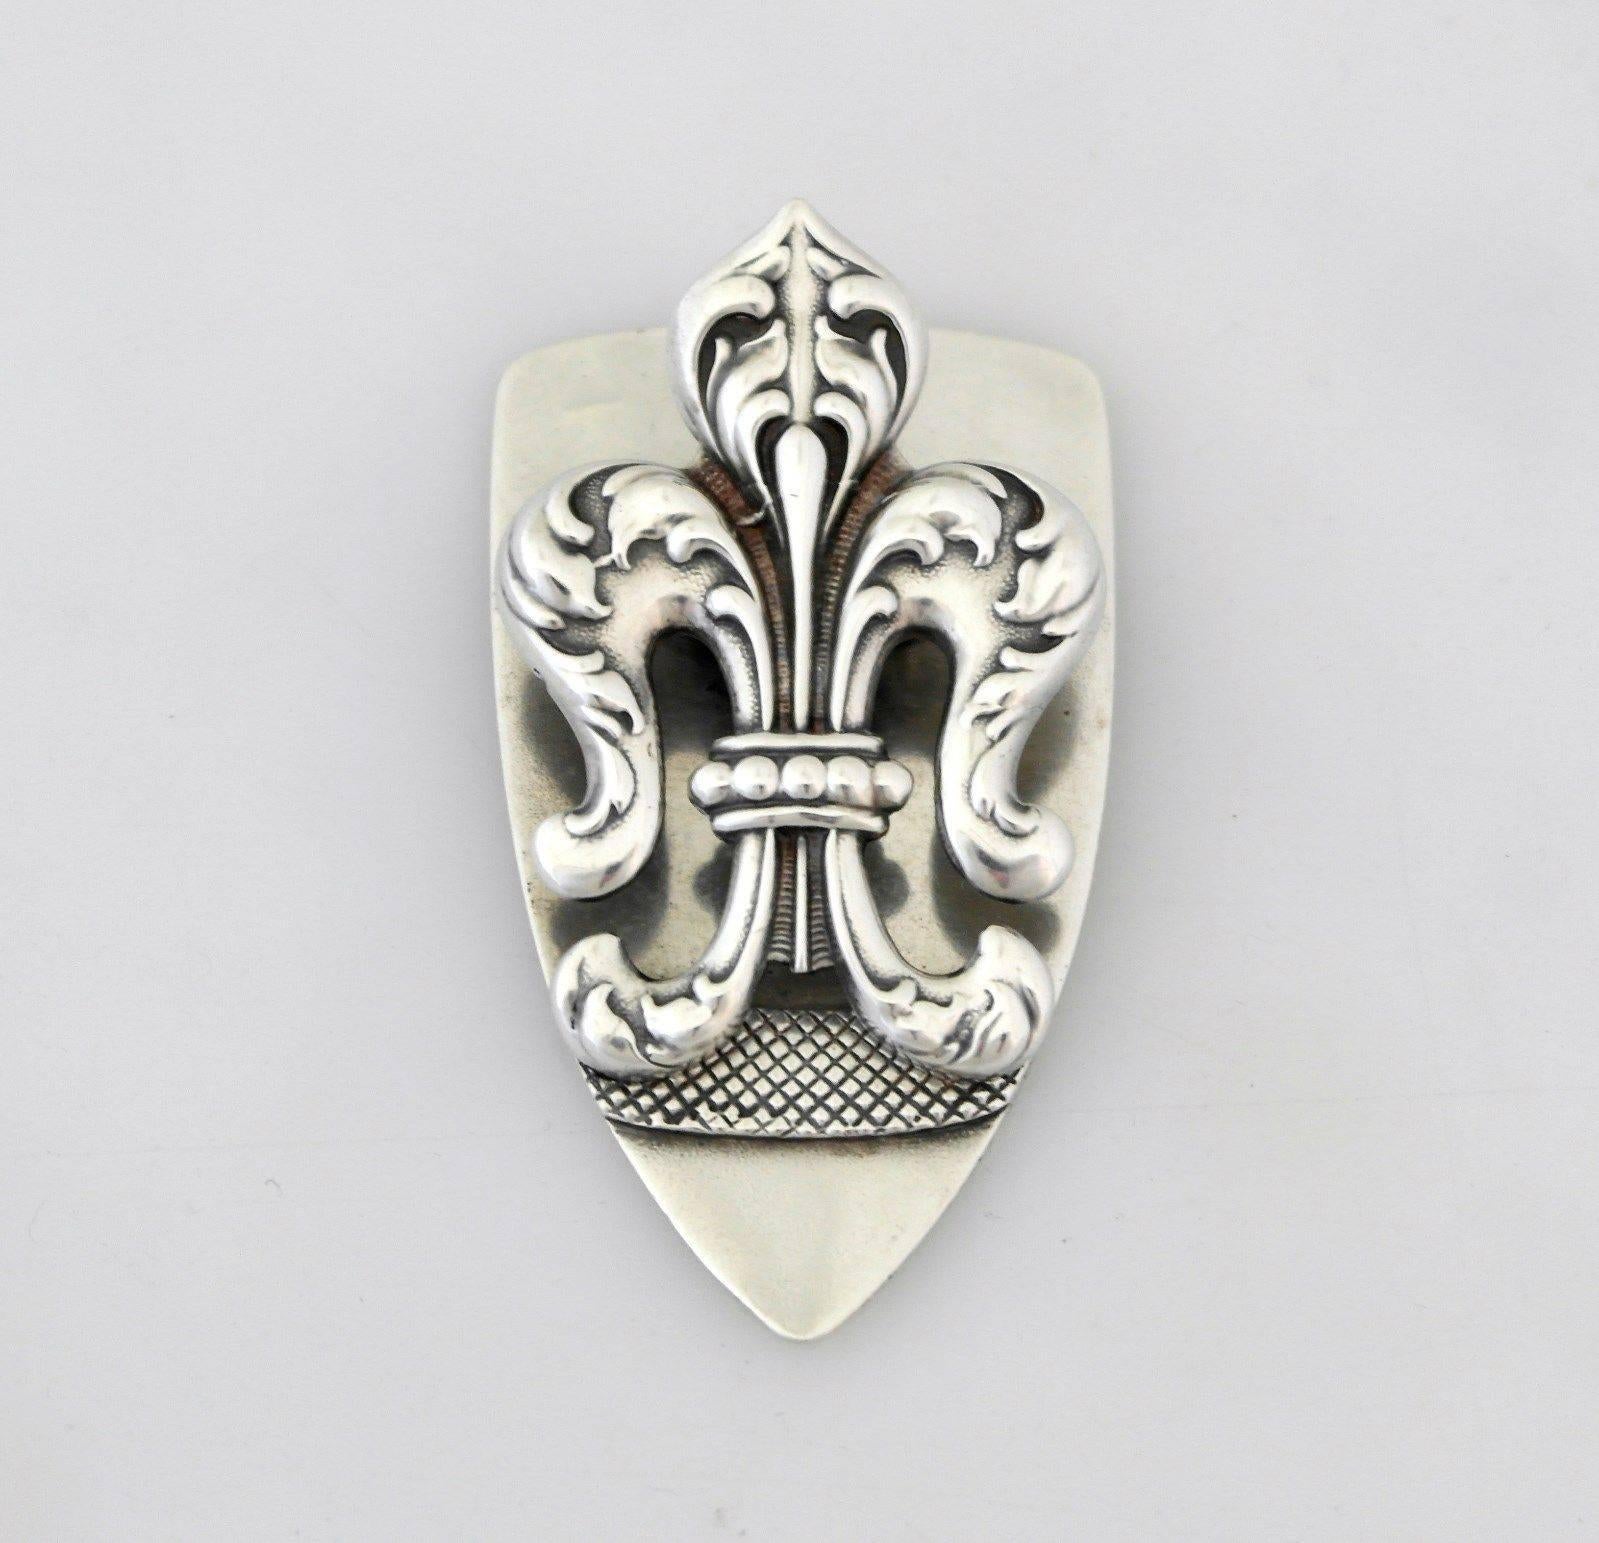 Being offered is a fine sterling silver document clip by George Shiebler, of New York; crest shaped with attached fleur-des-lis clip; superb detail. Dimensions: 2 7/8